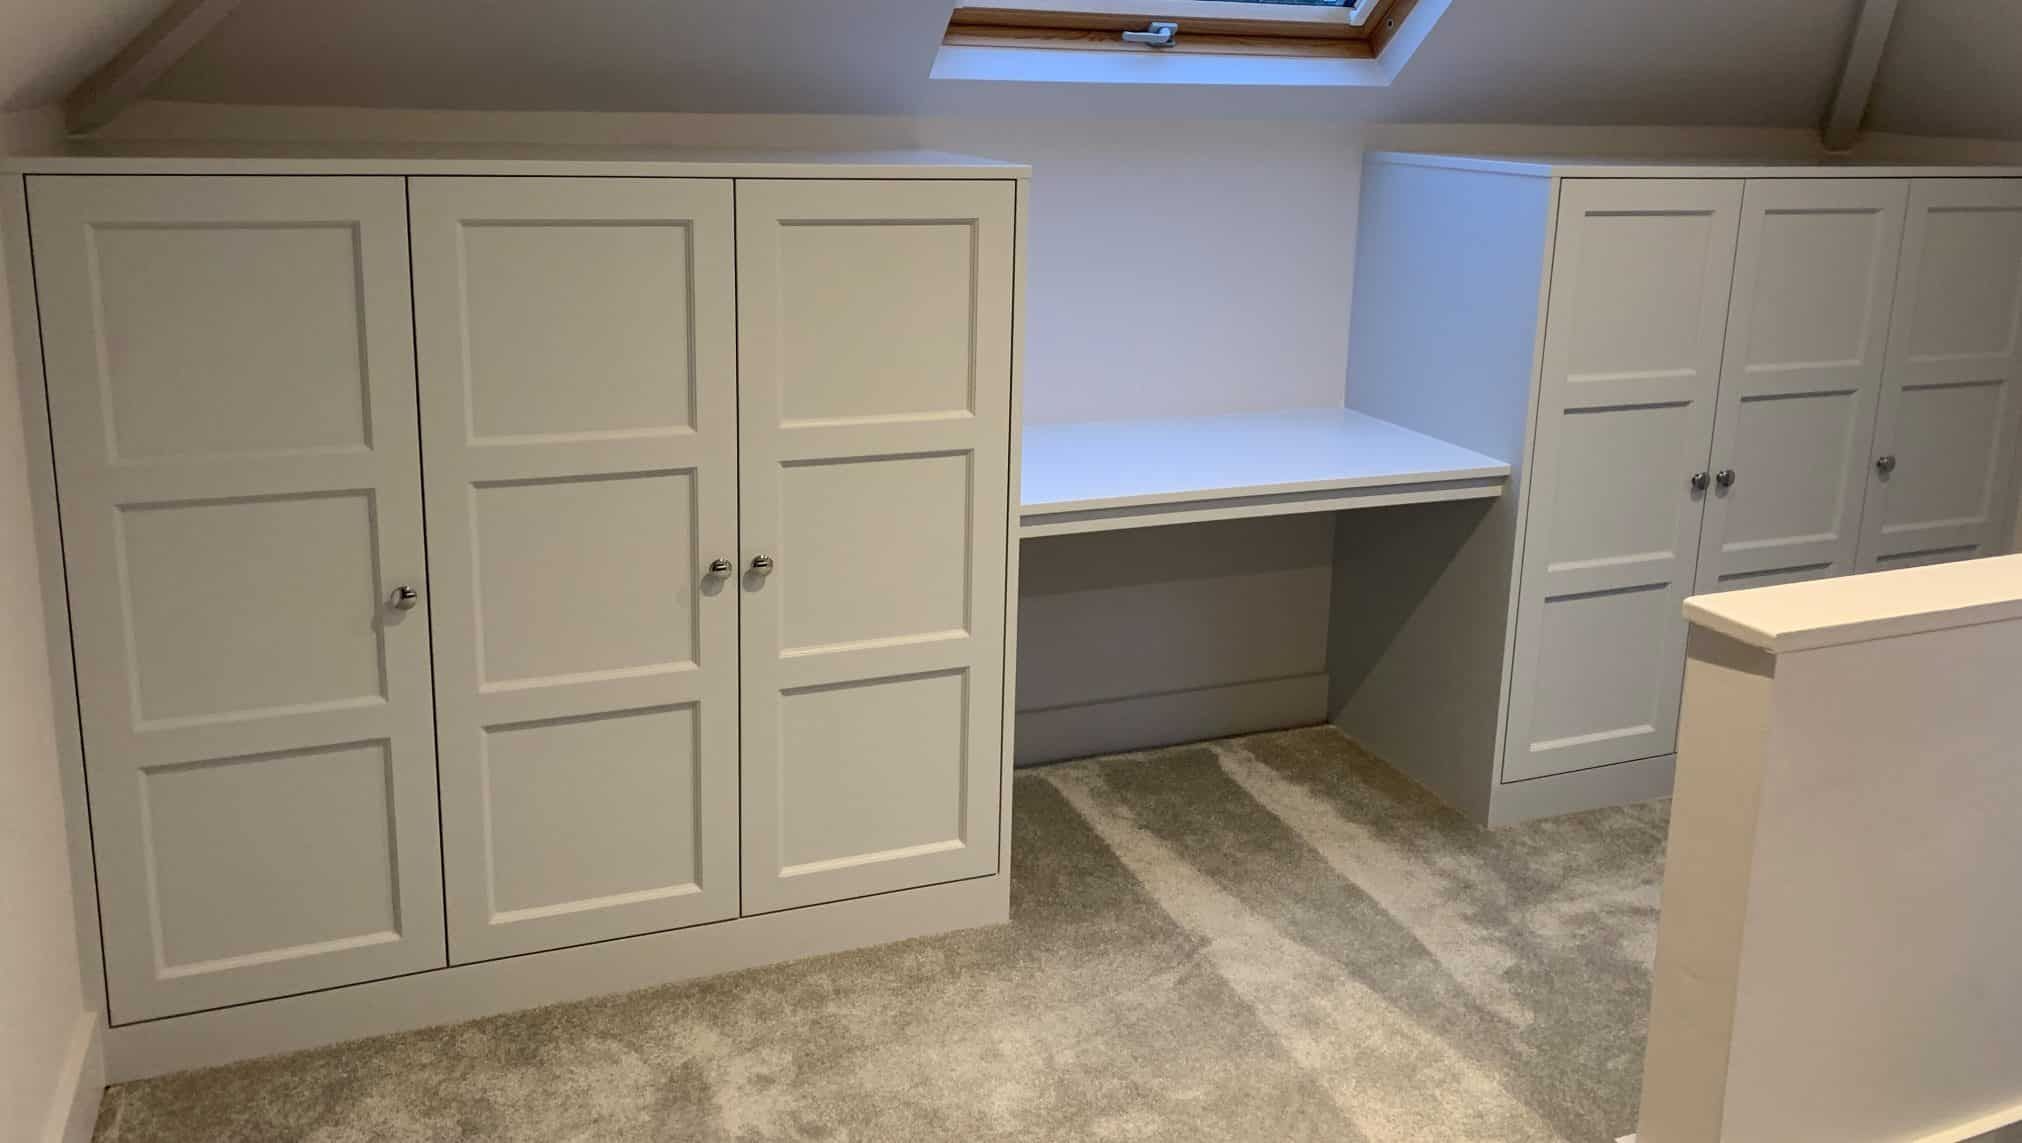 Low Ceiling Attic Wardrobes | Fitted Wardrobes For Sloping Ceilings Within Short Wardrobes (View 11 of 15)